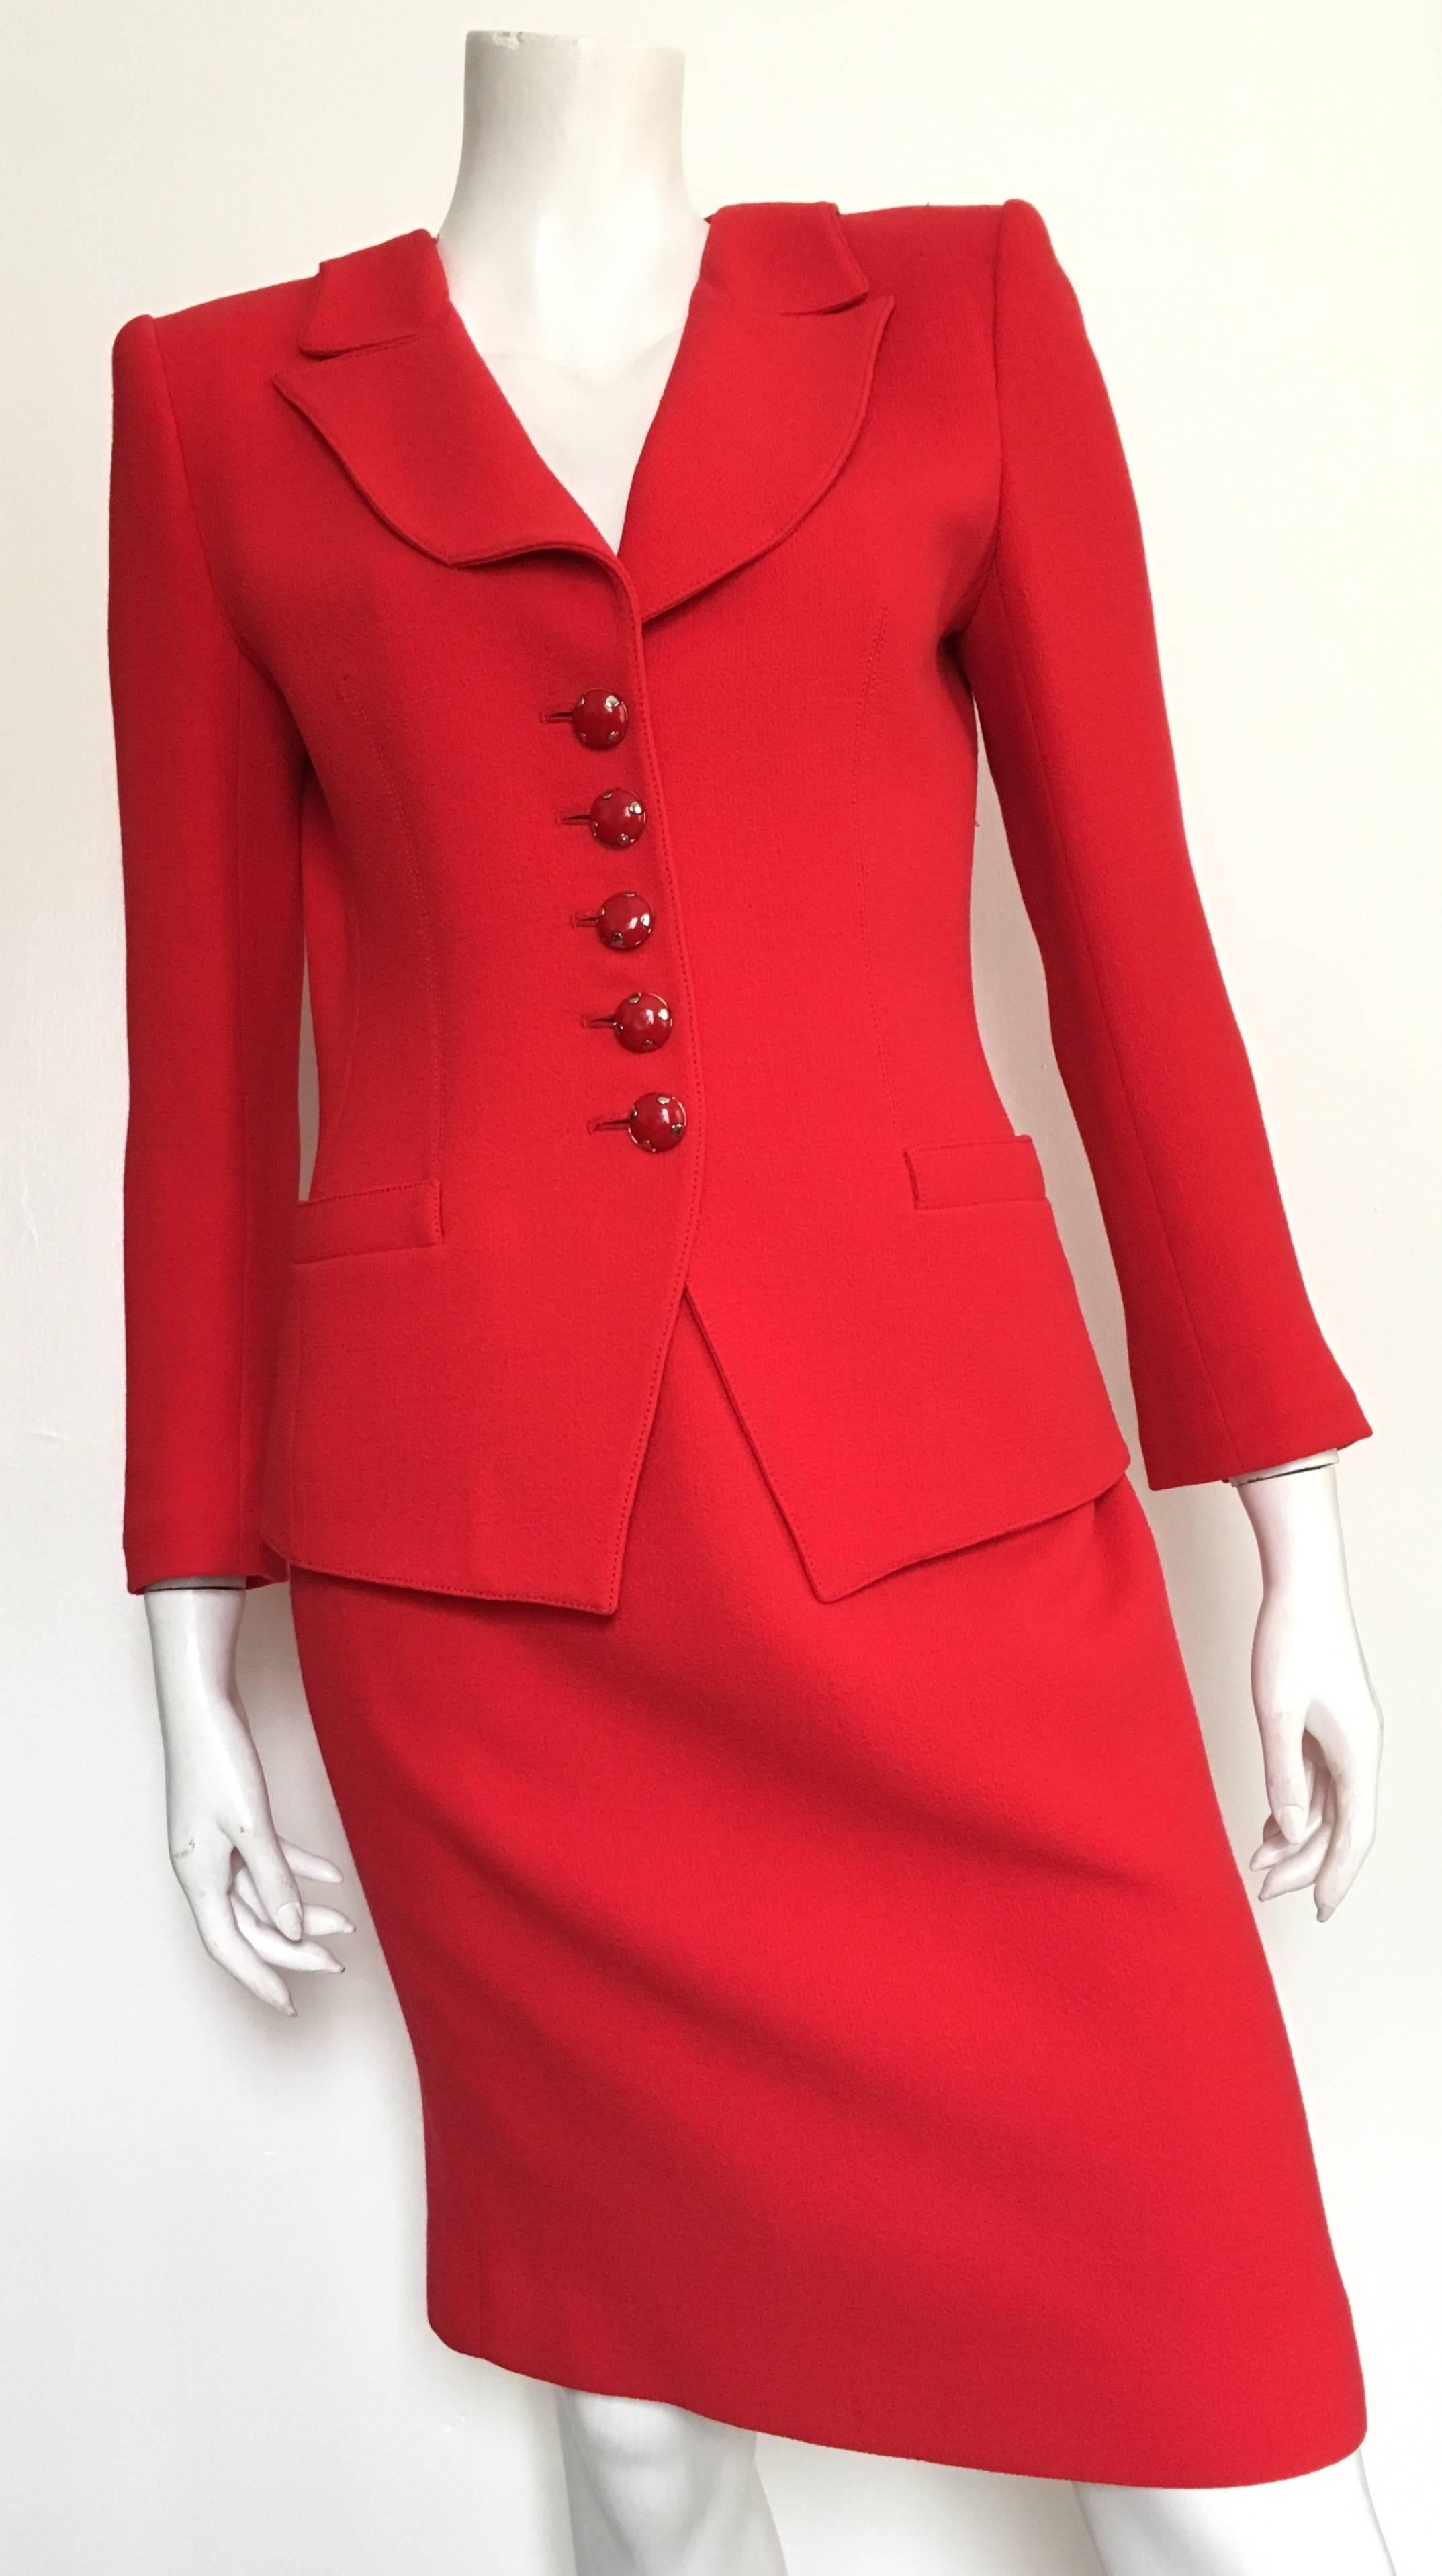 Emanuel Ungaro Red Power Wool Crepe Suit Size 6, 1990s For Sale 6